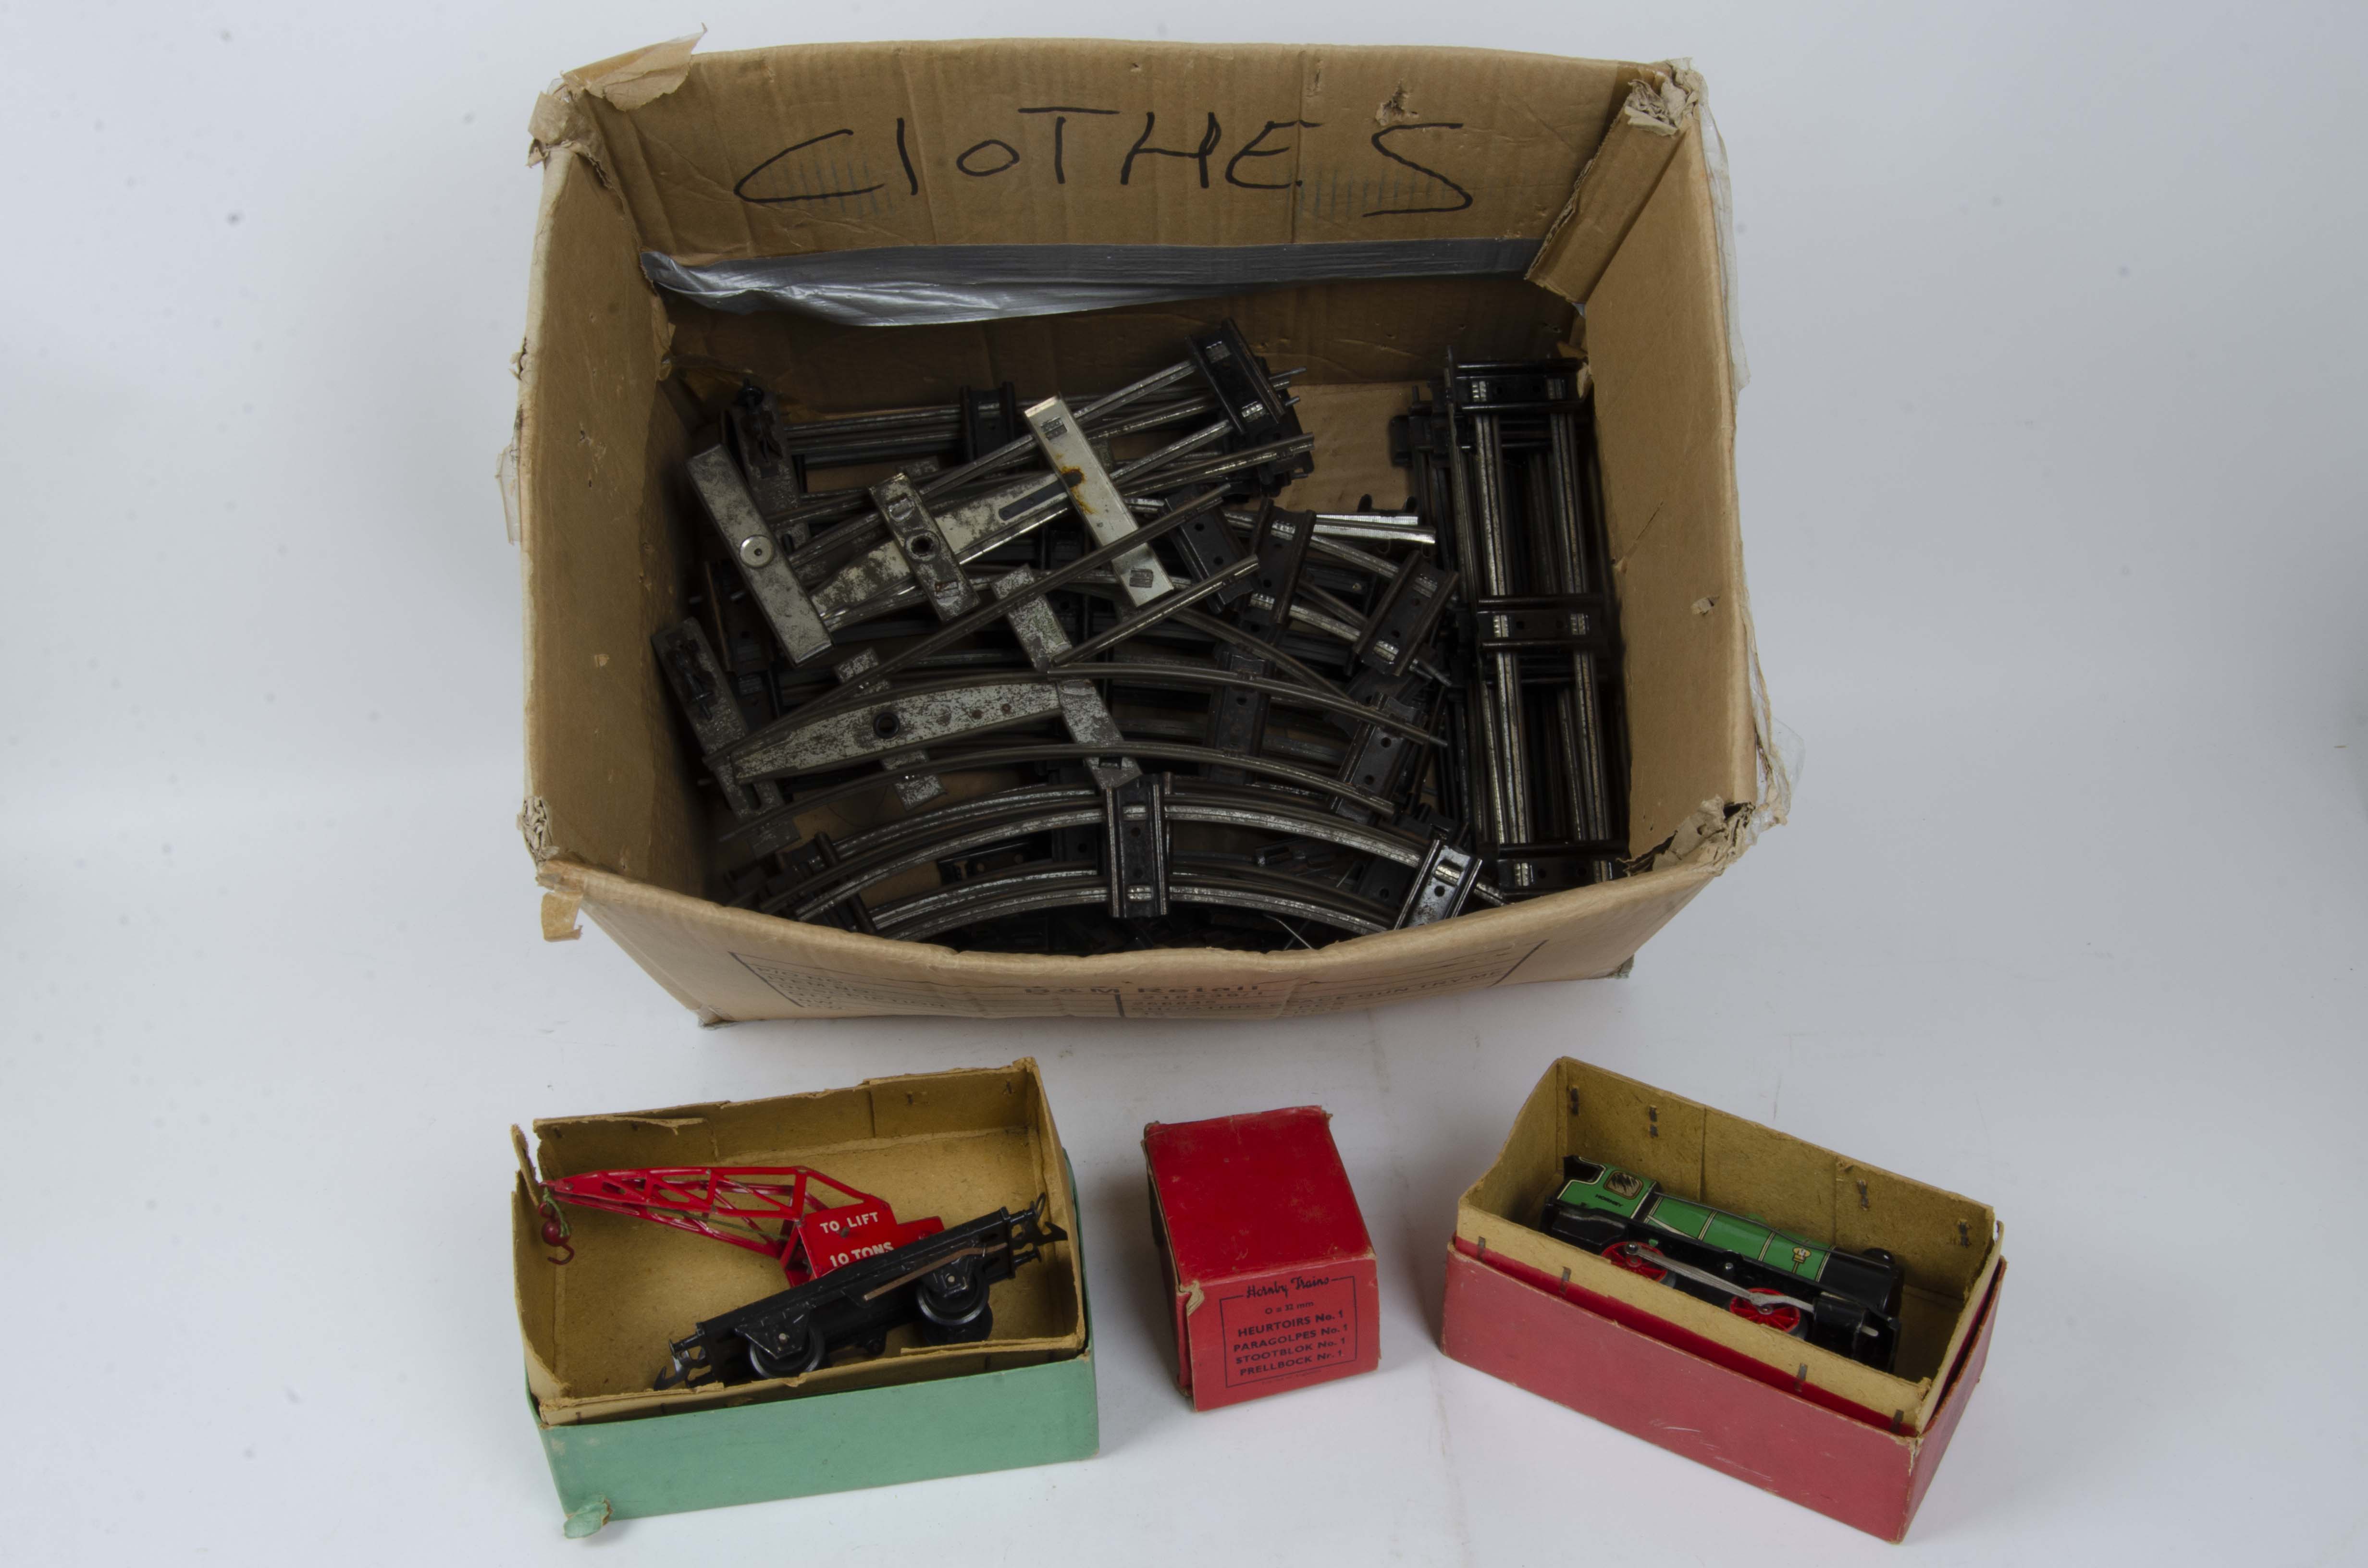 Hornby O Gauge Post-war Trains, including boxed green M1 locomotive (working but with damages and